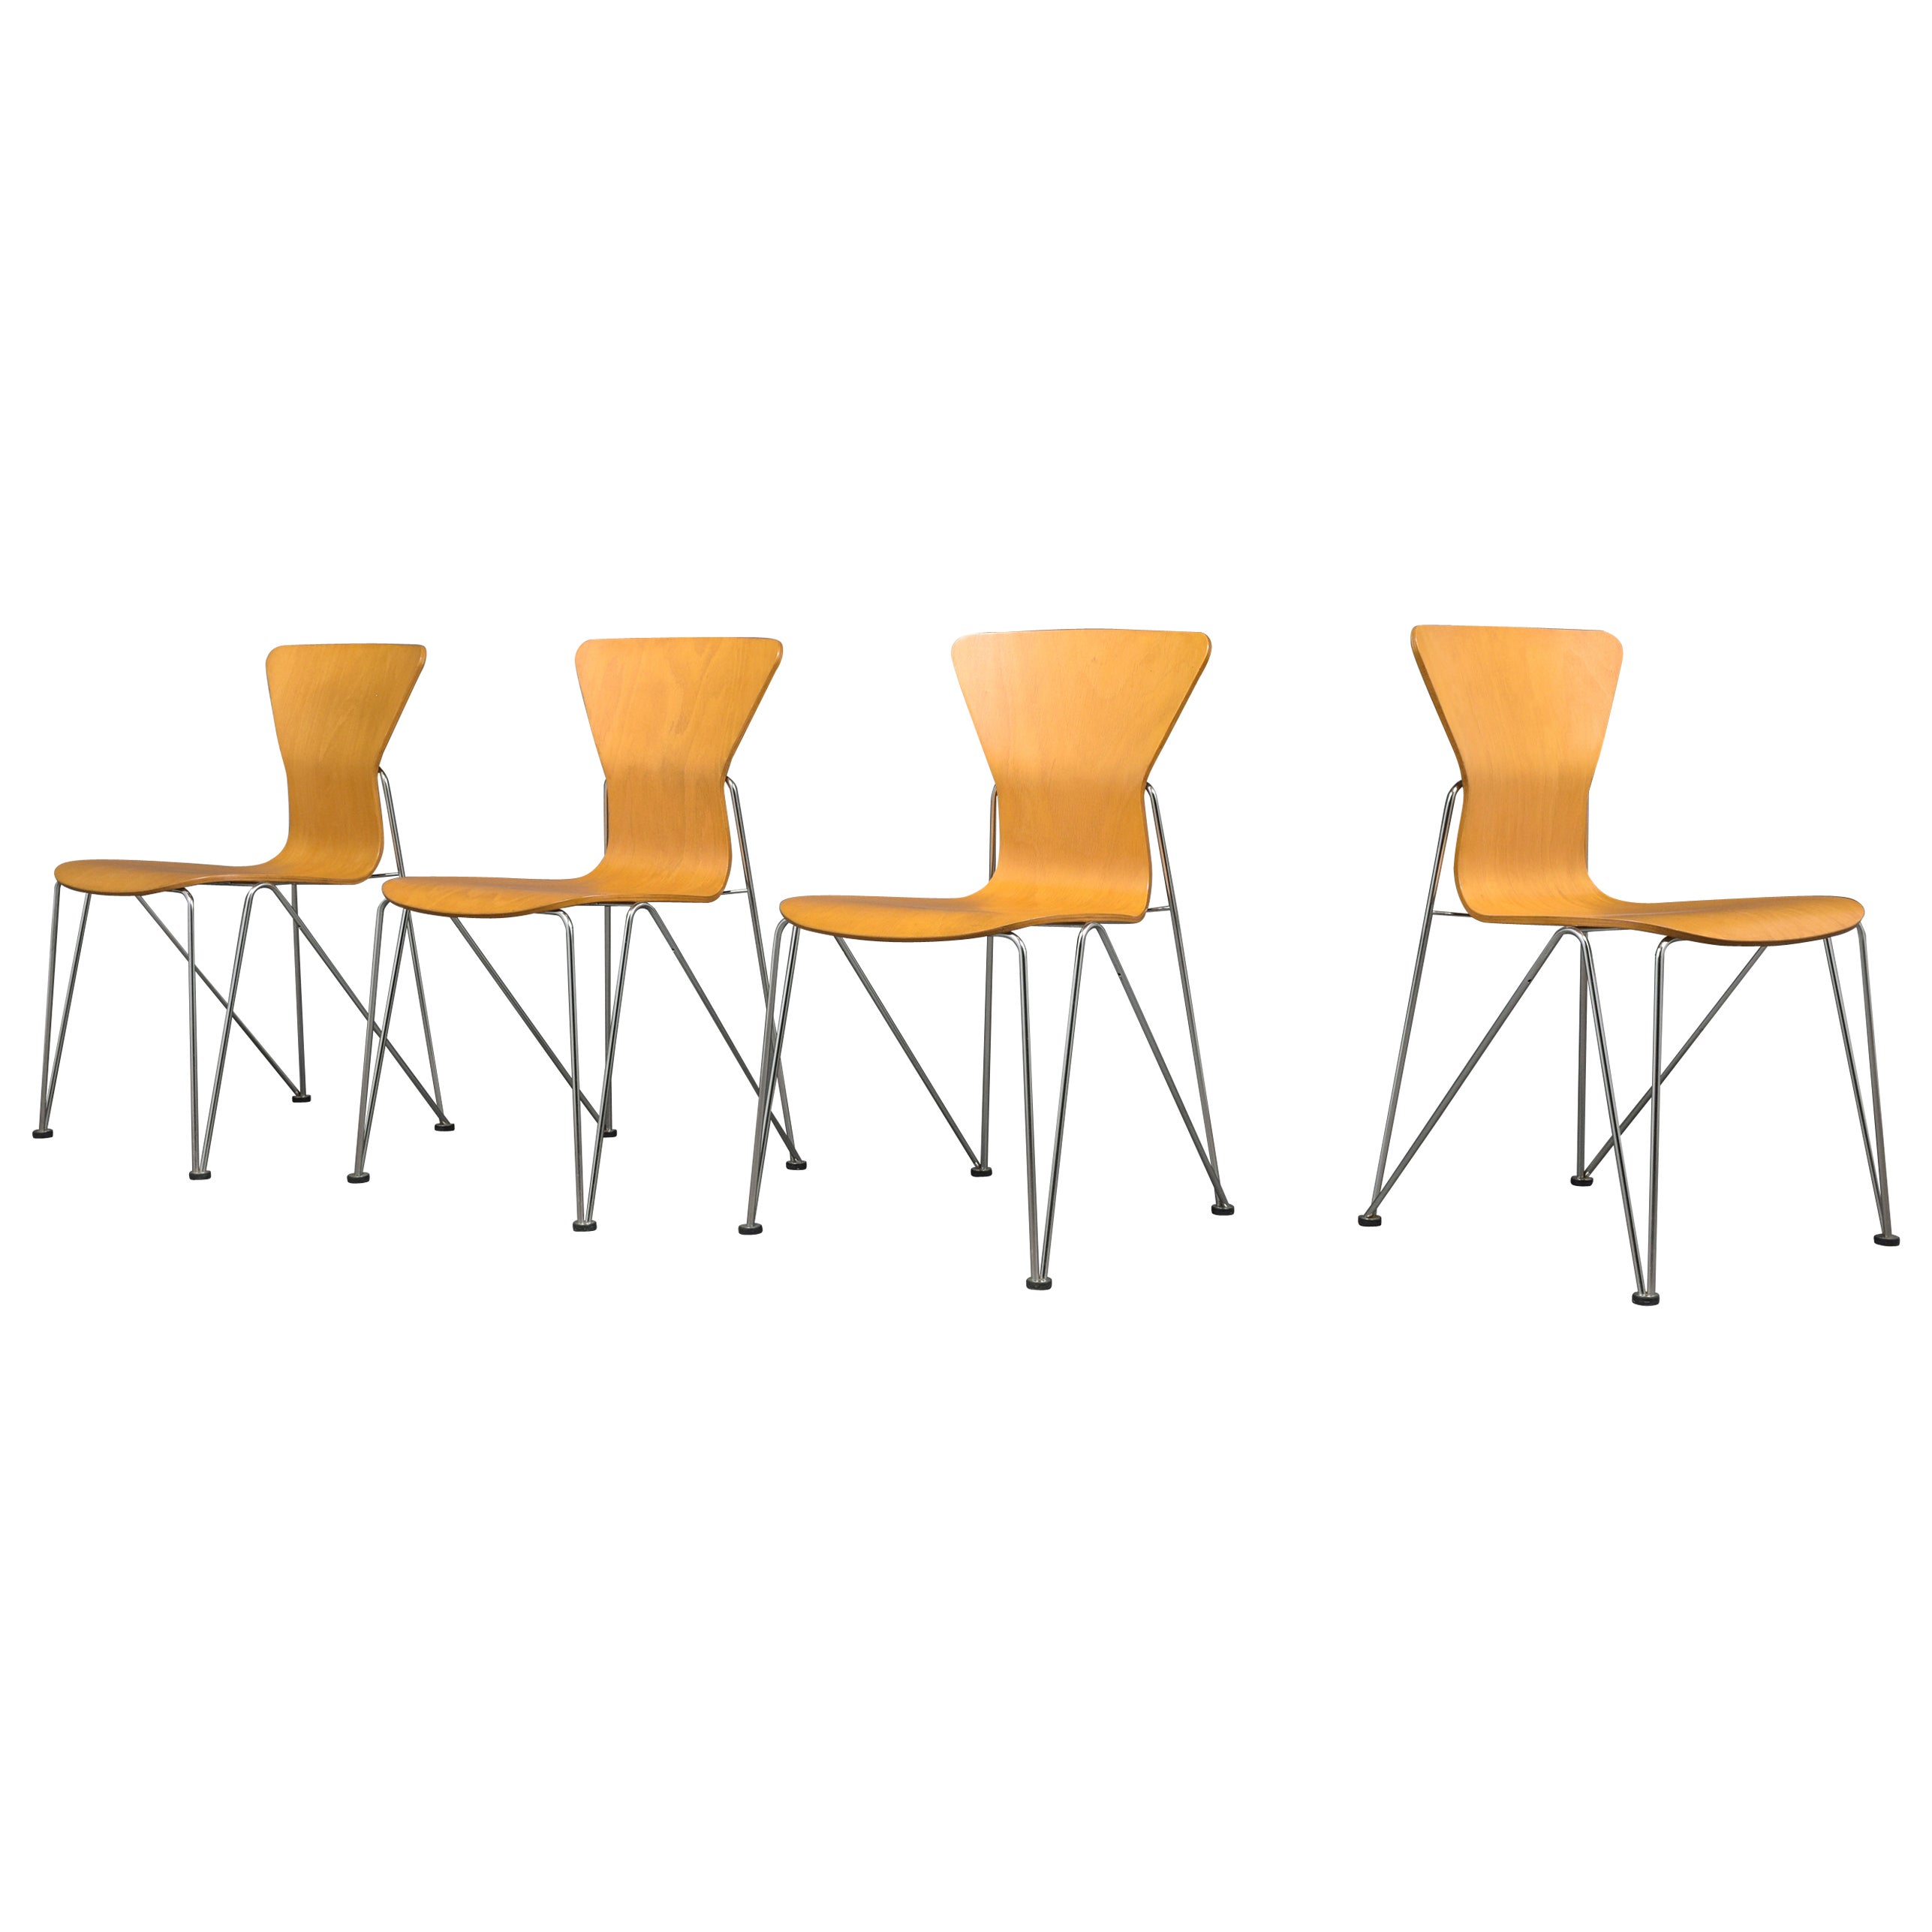 Set of Four Mid-Century Plywood Chairs